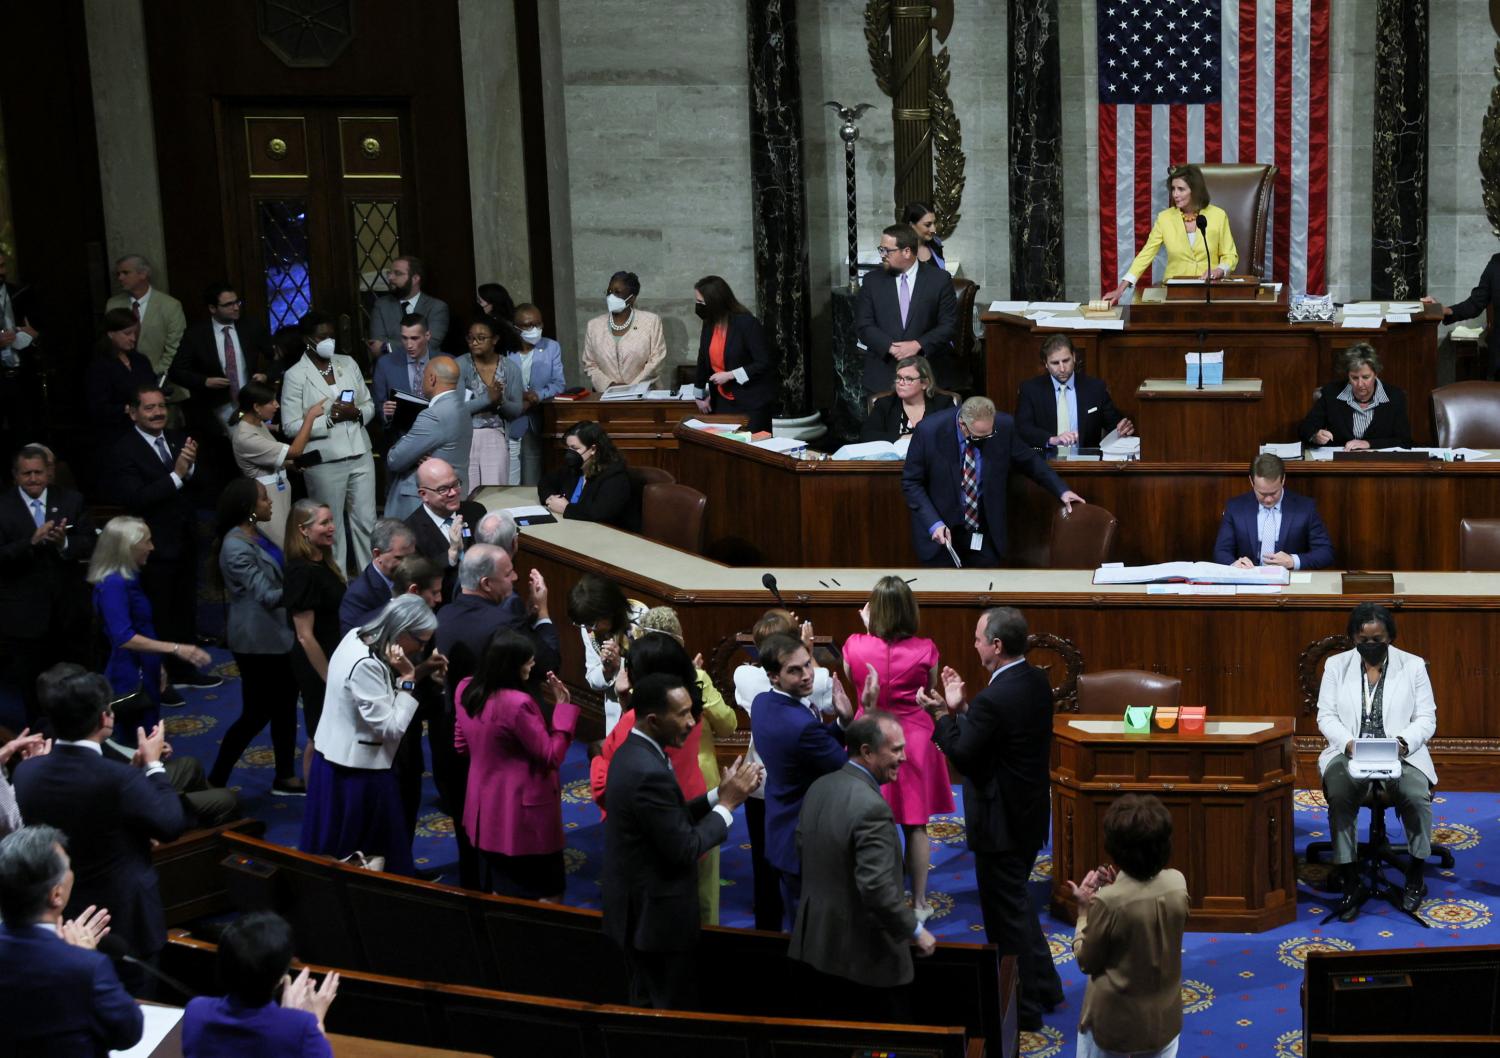 Democratic members of the U.S. House of Representatives applaud and celebrate as Speaker of the House Nancy Pelosi (D-CA) lays down her gavel after the House passed H.R. 6376, the "Inflation Reduction Act of 2022," which has already passed the U.S. Senate, in the House Chamber of the U.S. Capitol on Capitol Hill in Washington, August 12, 2022.   REUTERS/Leah Millis